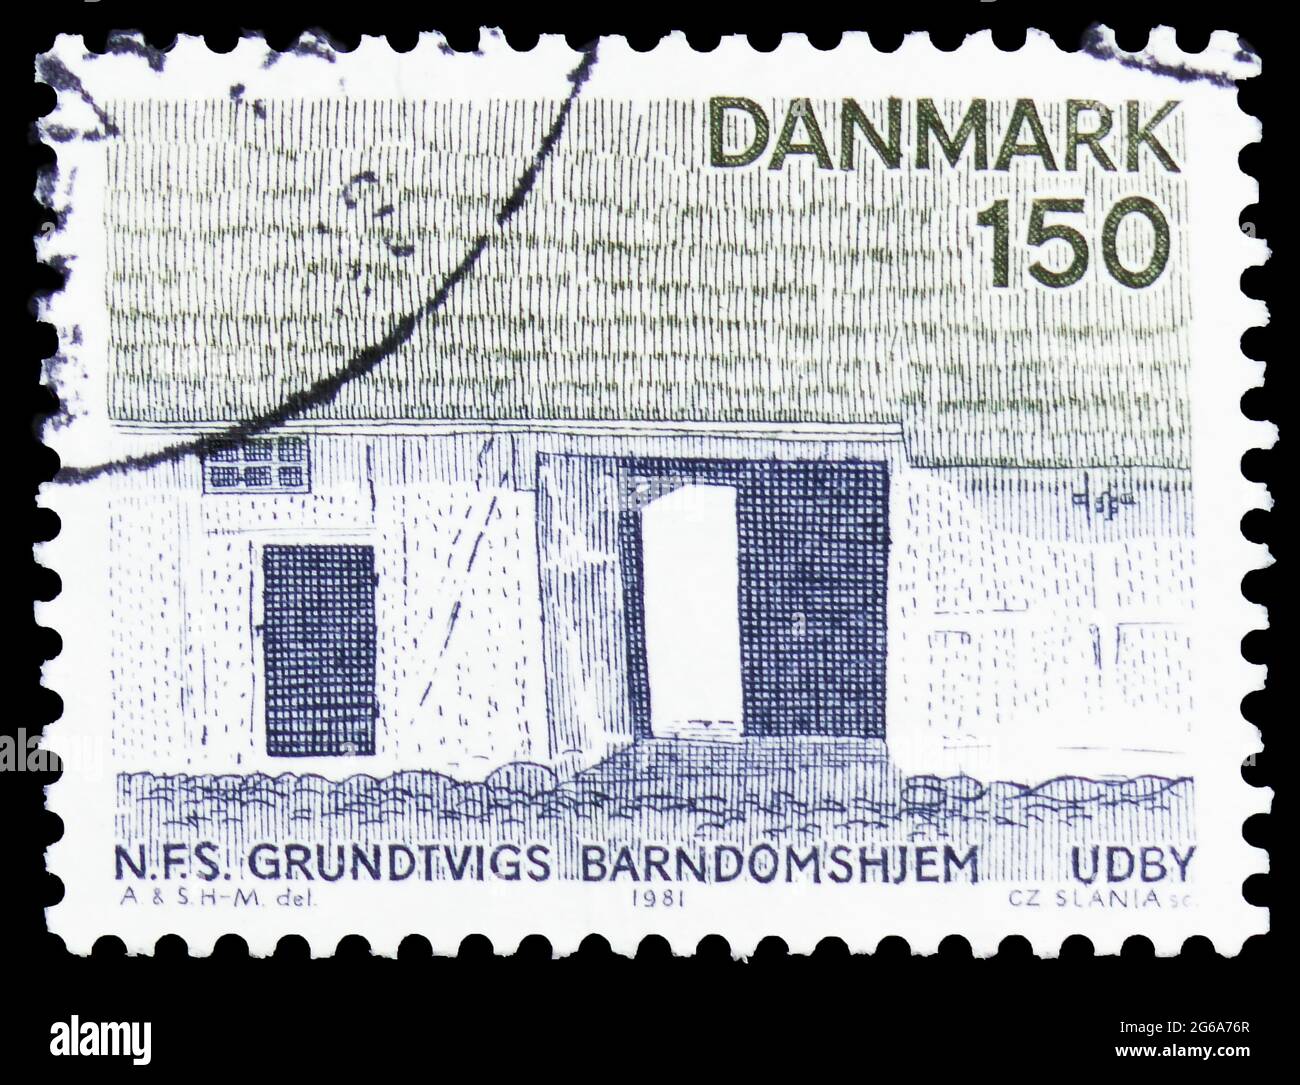 MOSCOW, RUSSIA - APRIL 18, 2020: Postage stamp printed in Denmark shows N.F.S.Grundtvig's Childhood Home, Udby, Danish Tourist Association - Zealand & Stock Photo